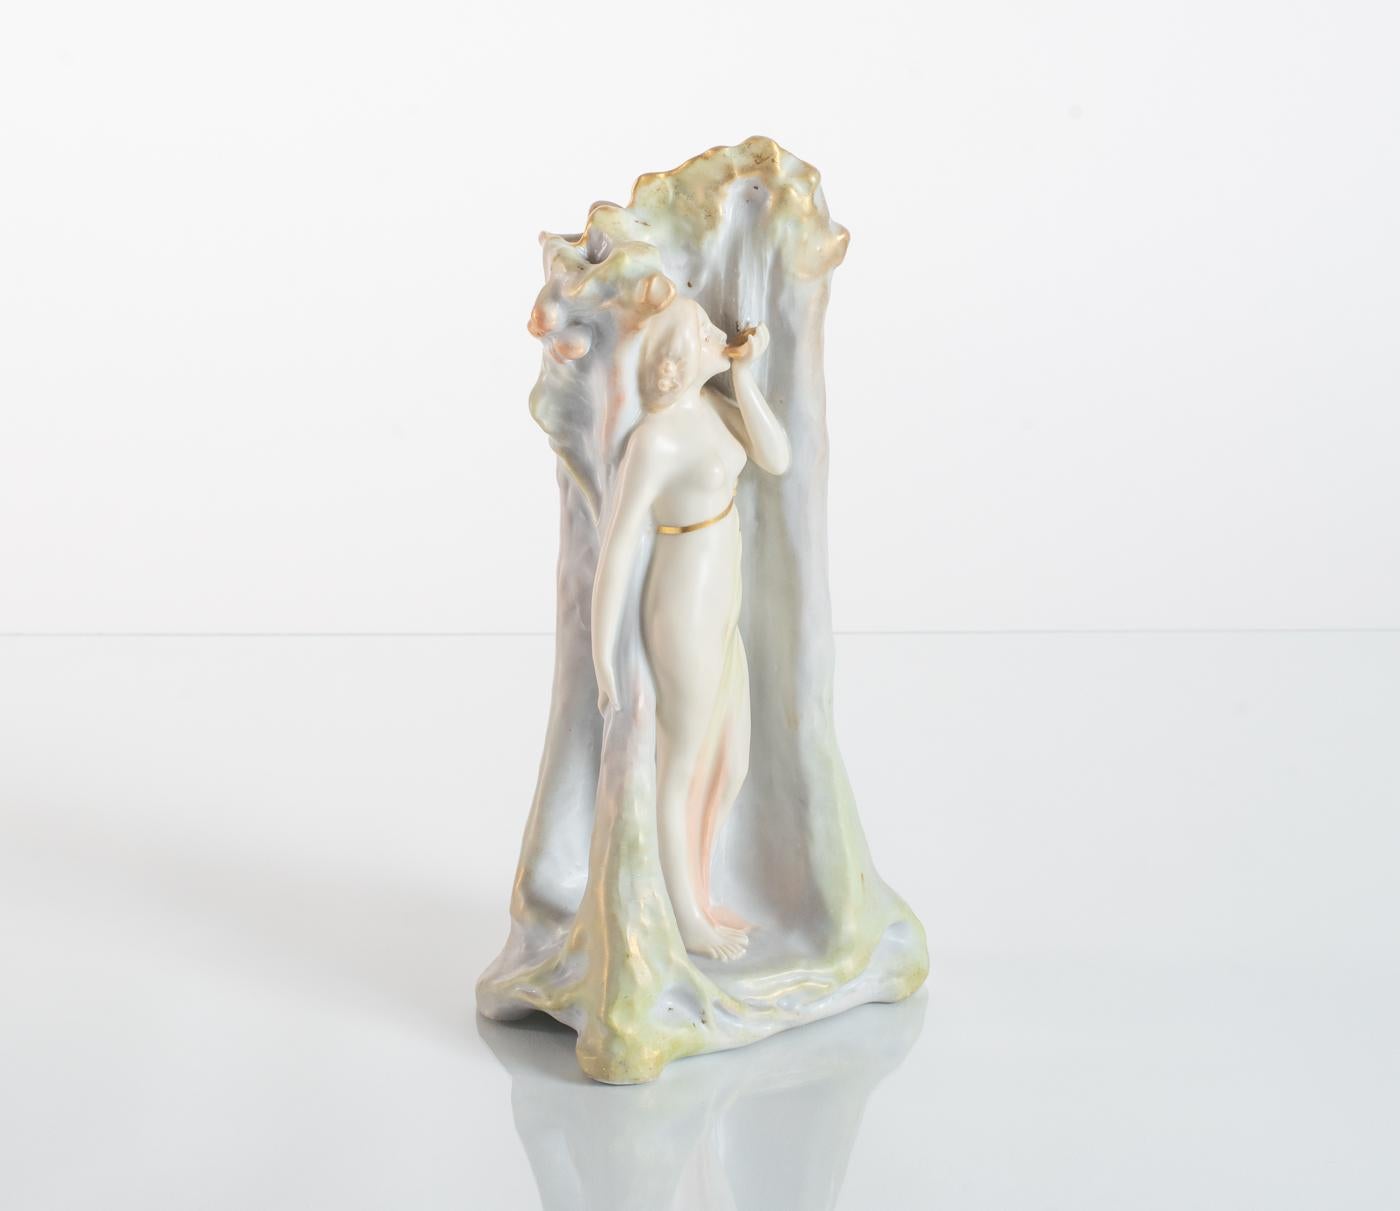 Austrian Art Nouveau vase featuring a maiden standing at the base of a tree, drinking from a leaf, with gentle shades of green and blue. An excellent example of the "ivory porcelain" ceramic material being used by producers in the Turn-Teplitz area.